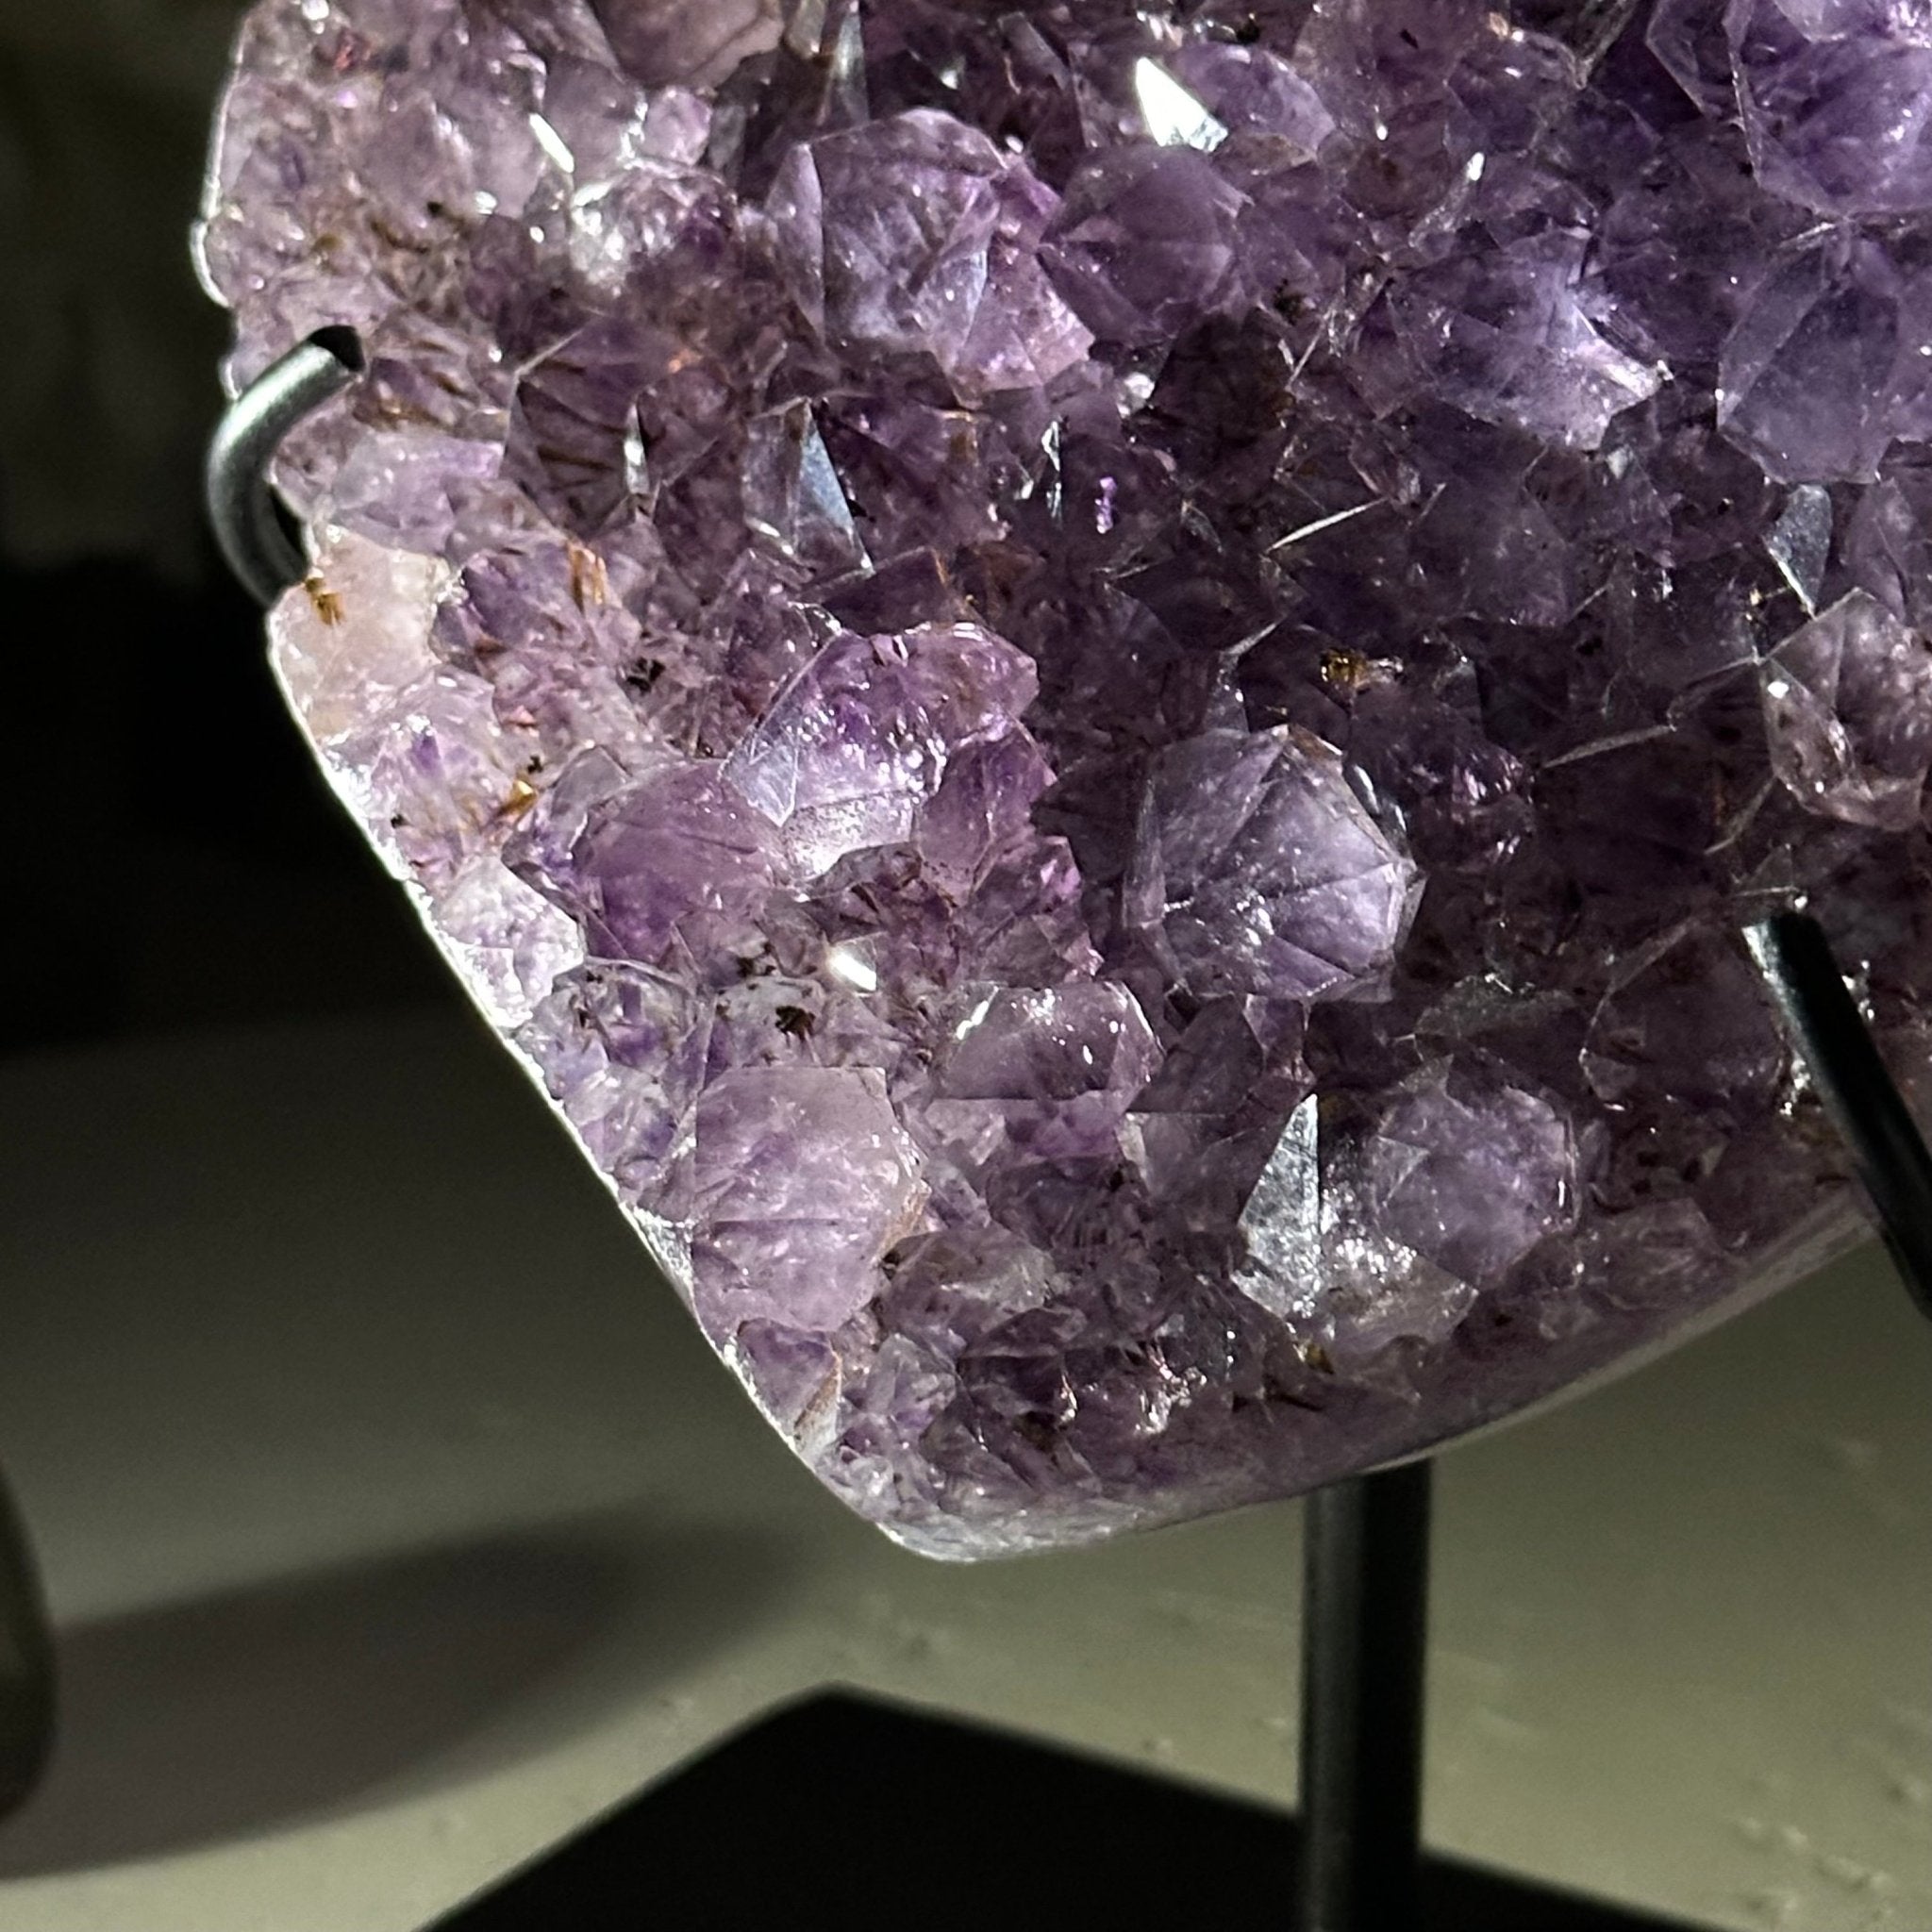 Extra Quality Amethyst Heart Geode w/ metal stand, 1.2 lbs & 5" Tall #5463-0296 - Brazil GemsBrazil GemsExtra Quality Amethyst Heart Geode w/ metal stand, 1.2 lbs & 5" Tall #5463-0296Hearts5463-0296